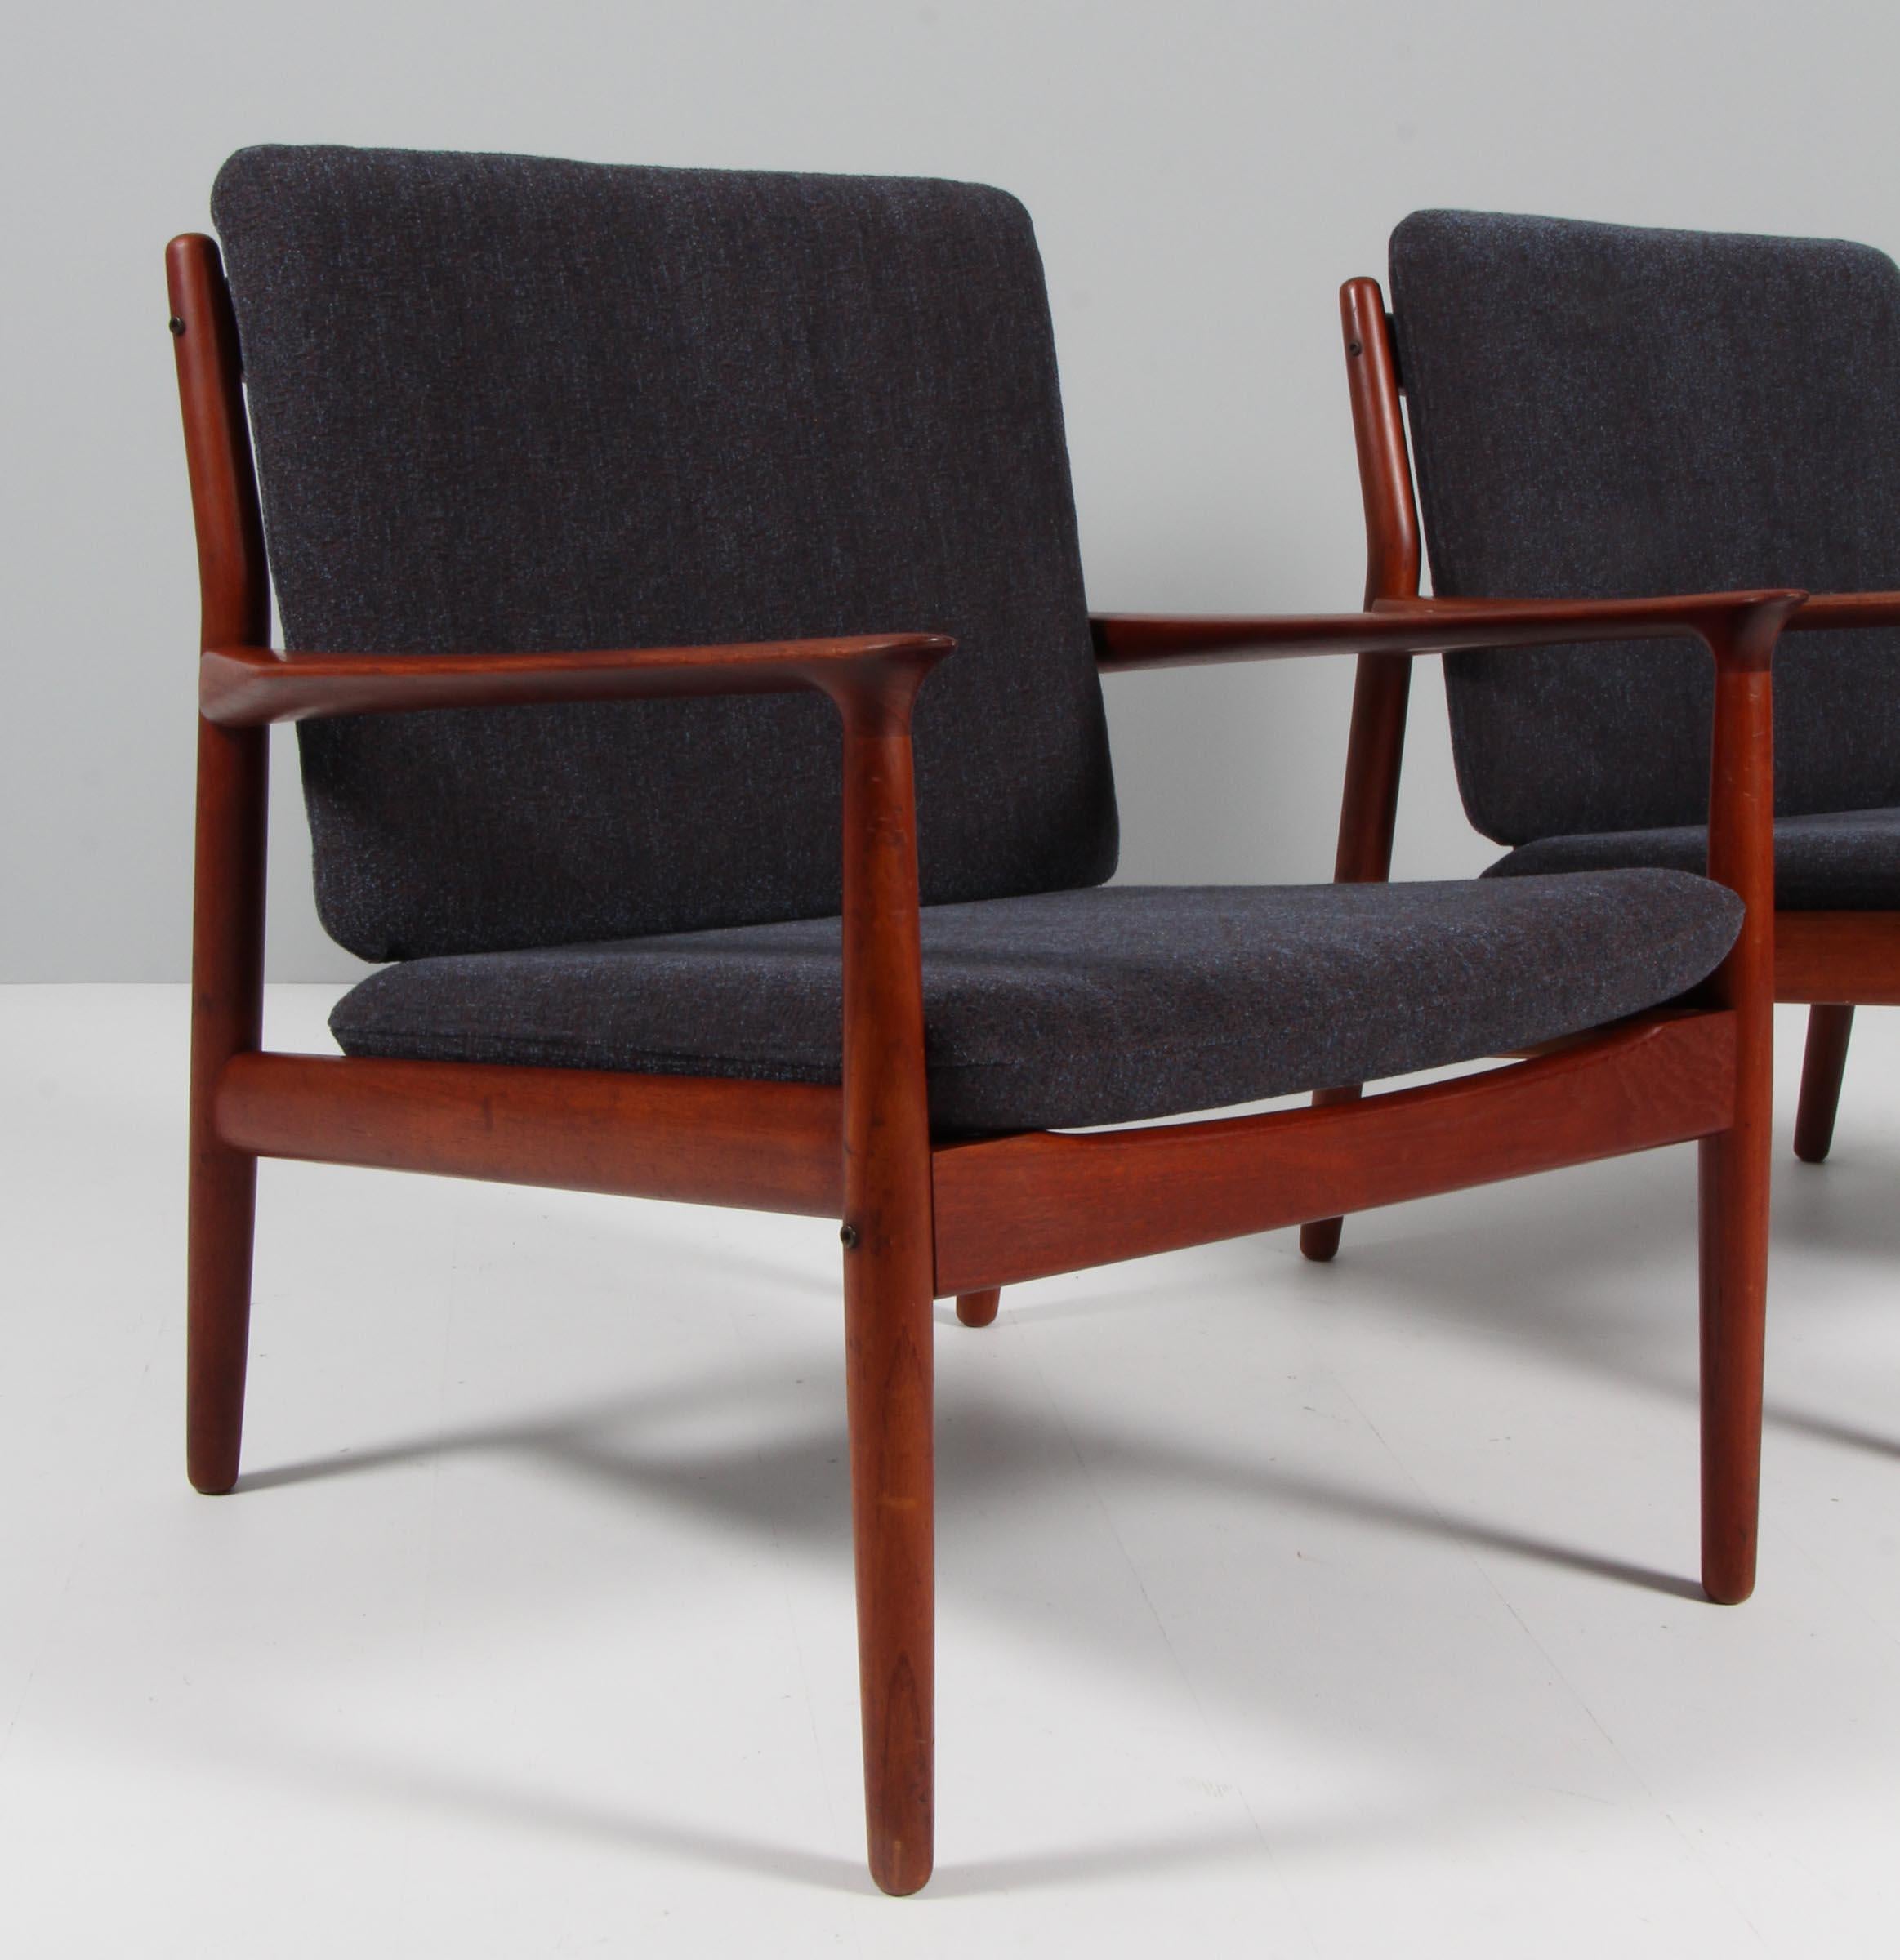 Scandinavian Modern Pair of Grete Jalk Lounge Chairs with Frame of Teak, Textured Fabric